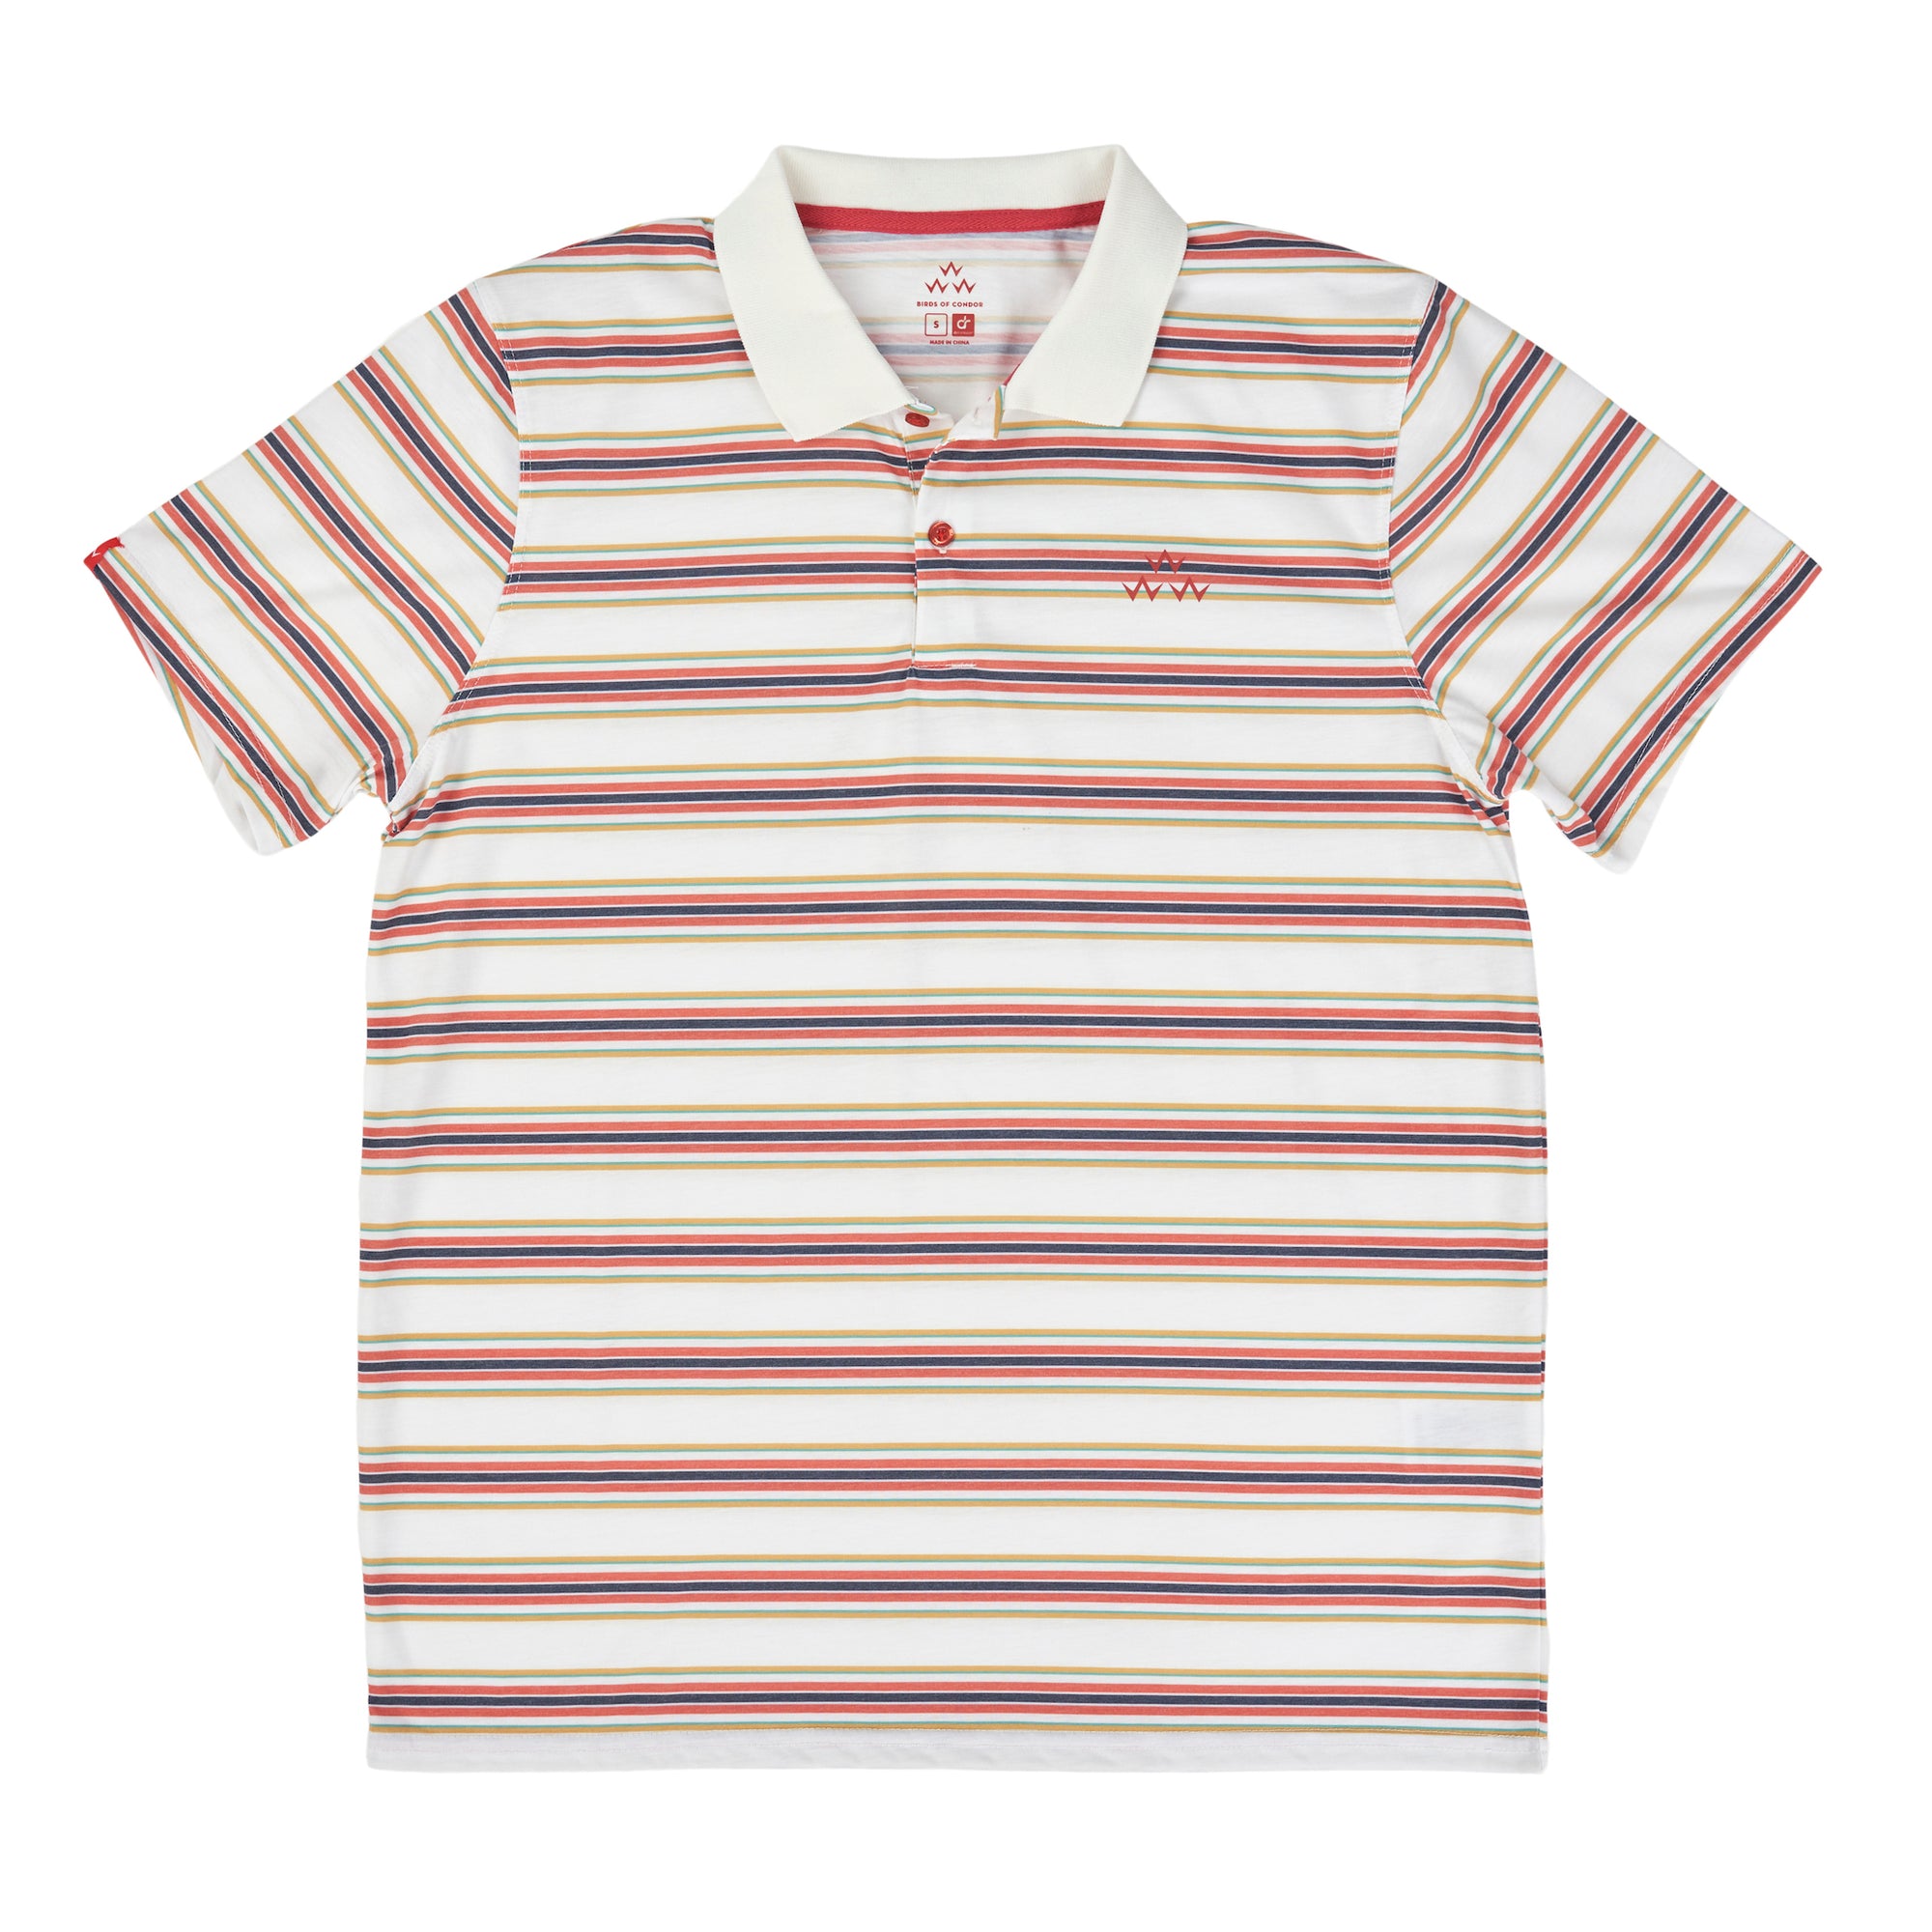 See that guy in the stripe polo? Not just a cool look, the fairway polo shirt is an ultra cool wear,, with moisture wicking drirelease fabric to keep you feeling fresh.  Made by Birds of Condor golf apparel from Byron Bay, Australia.